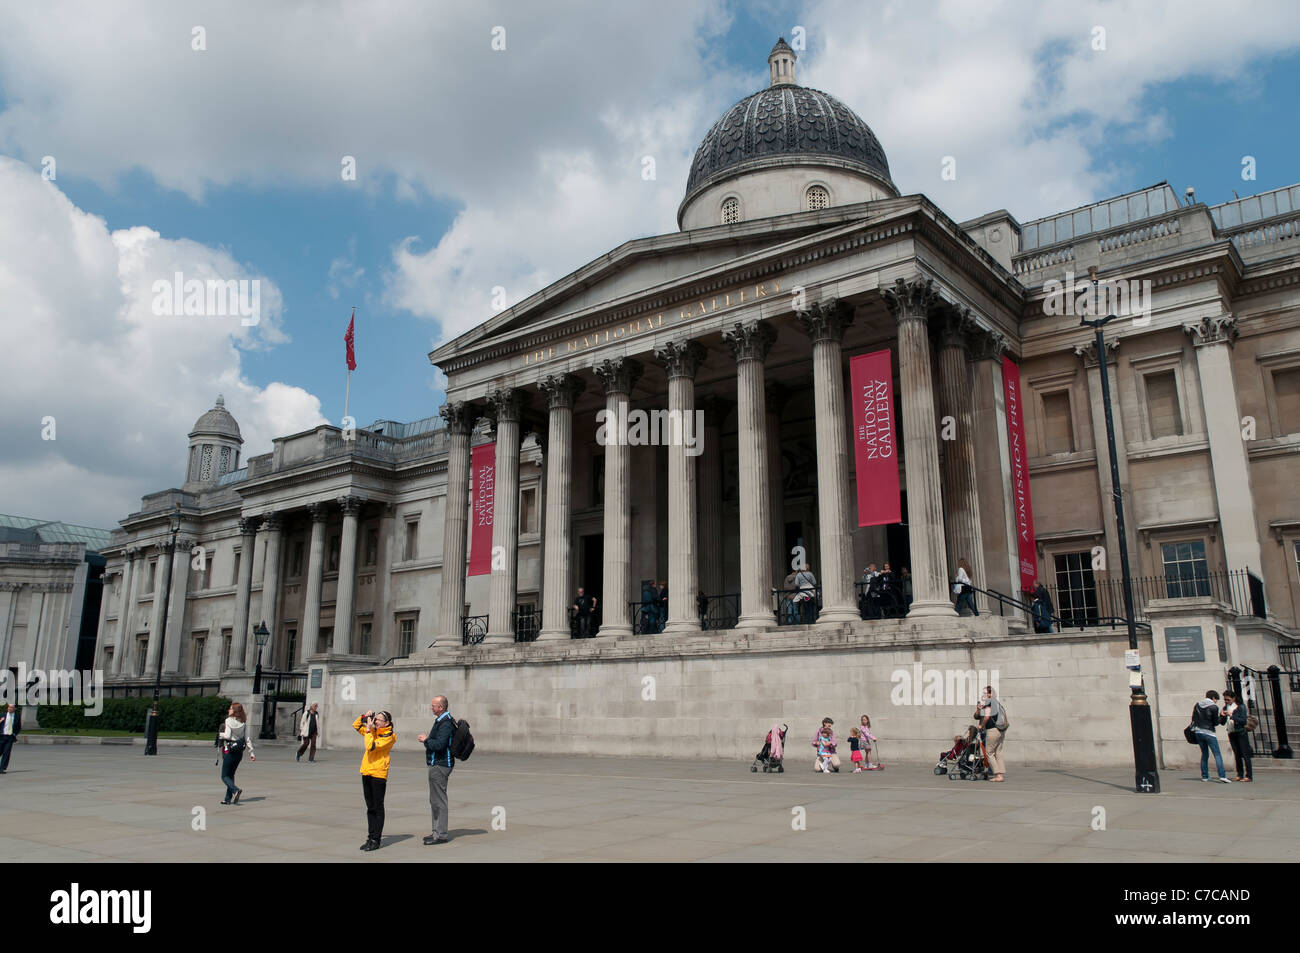 Tourists in front of the facade of the National Gallery, Trafalgar Square, London, England, United Kingdom. Stock Photo